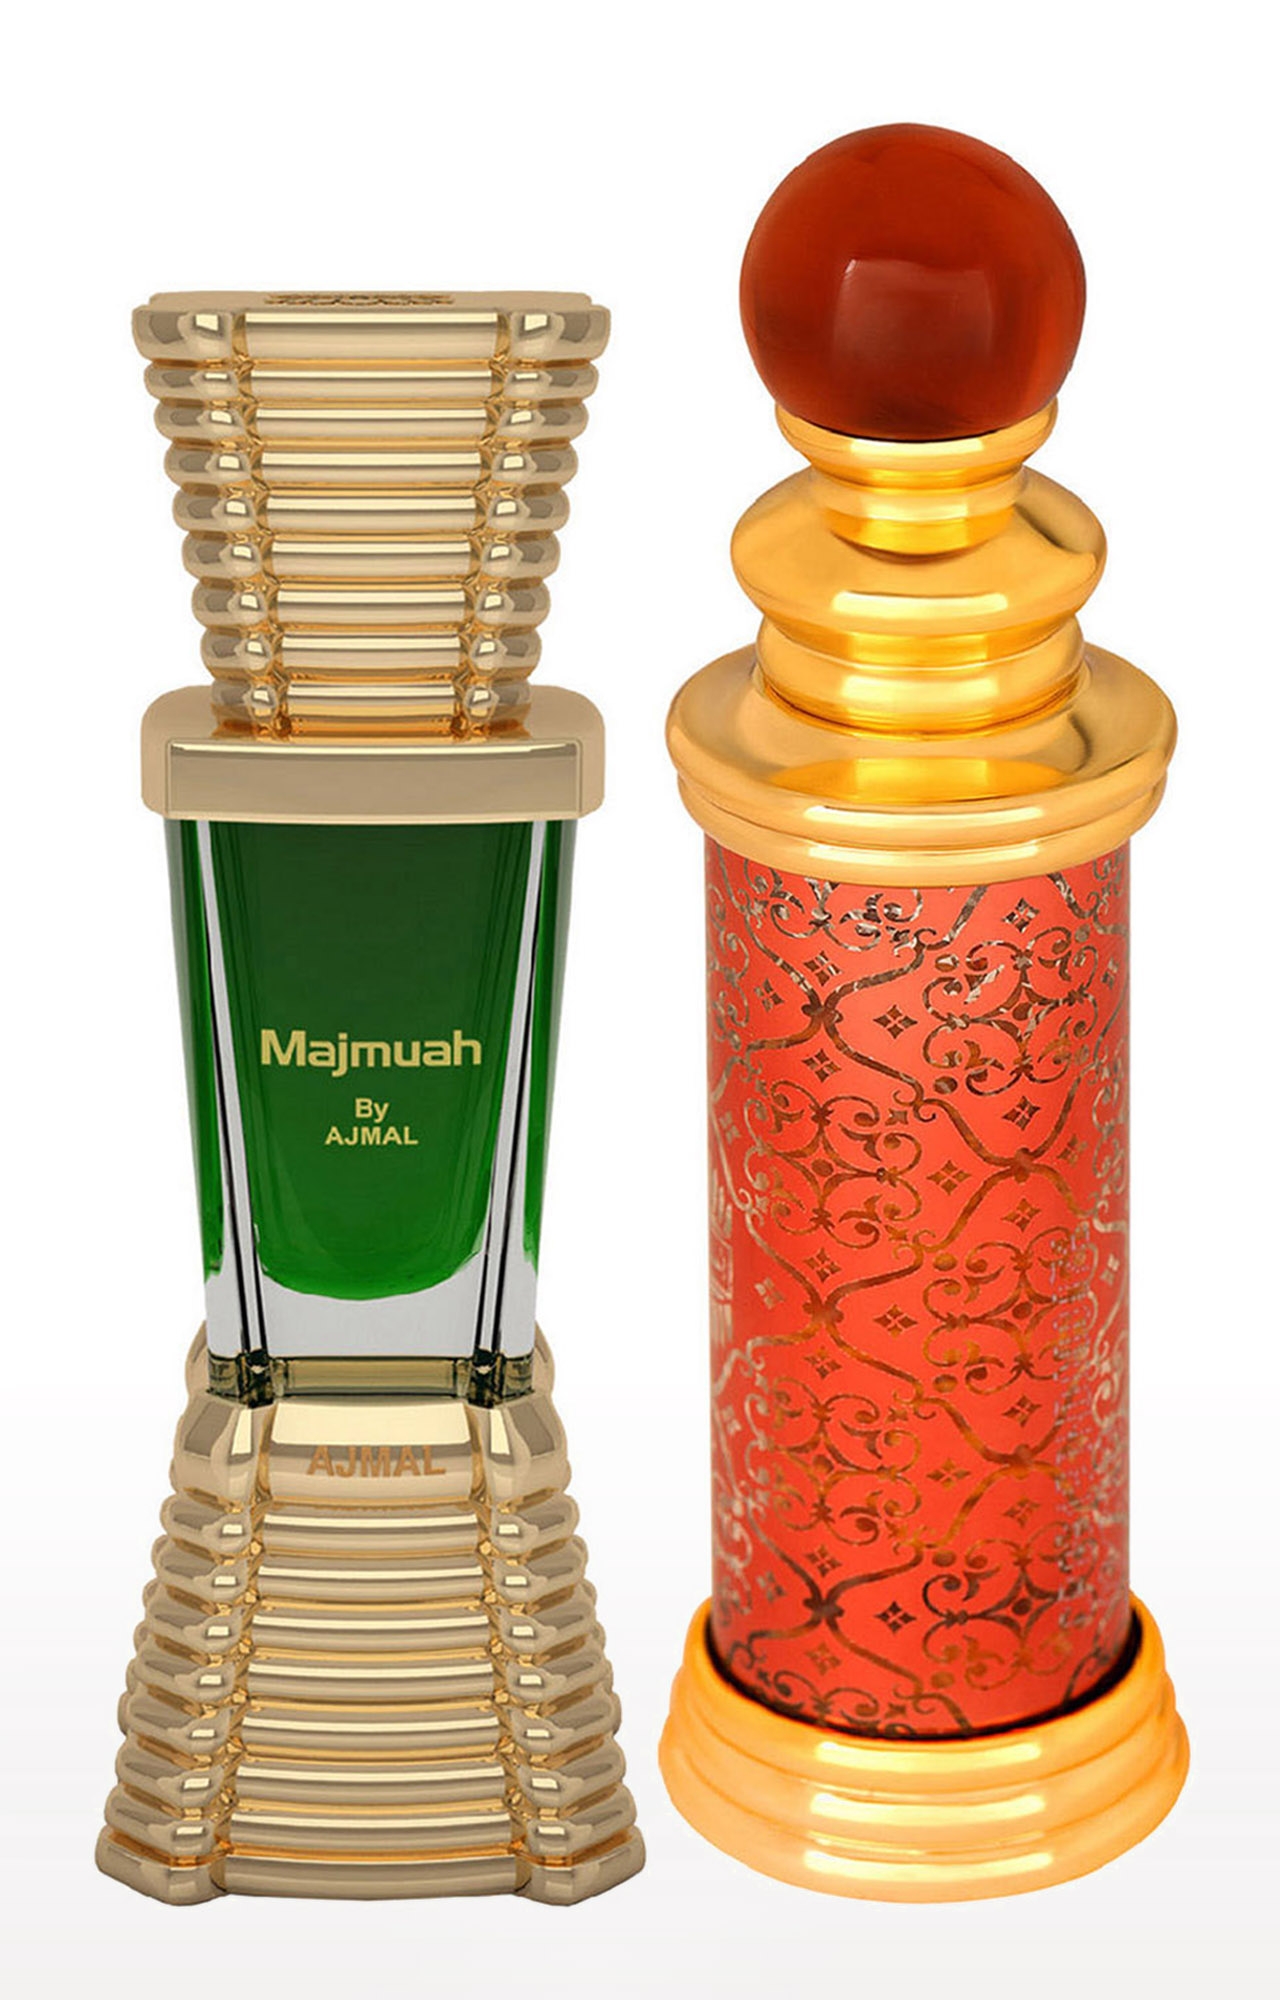 Ajmal Majmua Concentrated Perfume Oil Oriental Alcohol-free Attar 10ml for Unisex and Classic Oud Concentrated Perfume Oil Oudh Alcohol-free Attar 10ml for Unisex